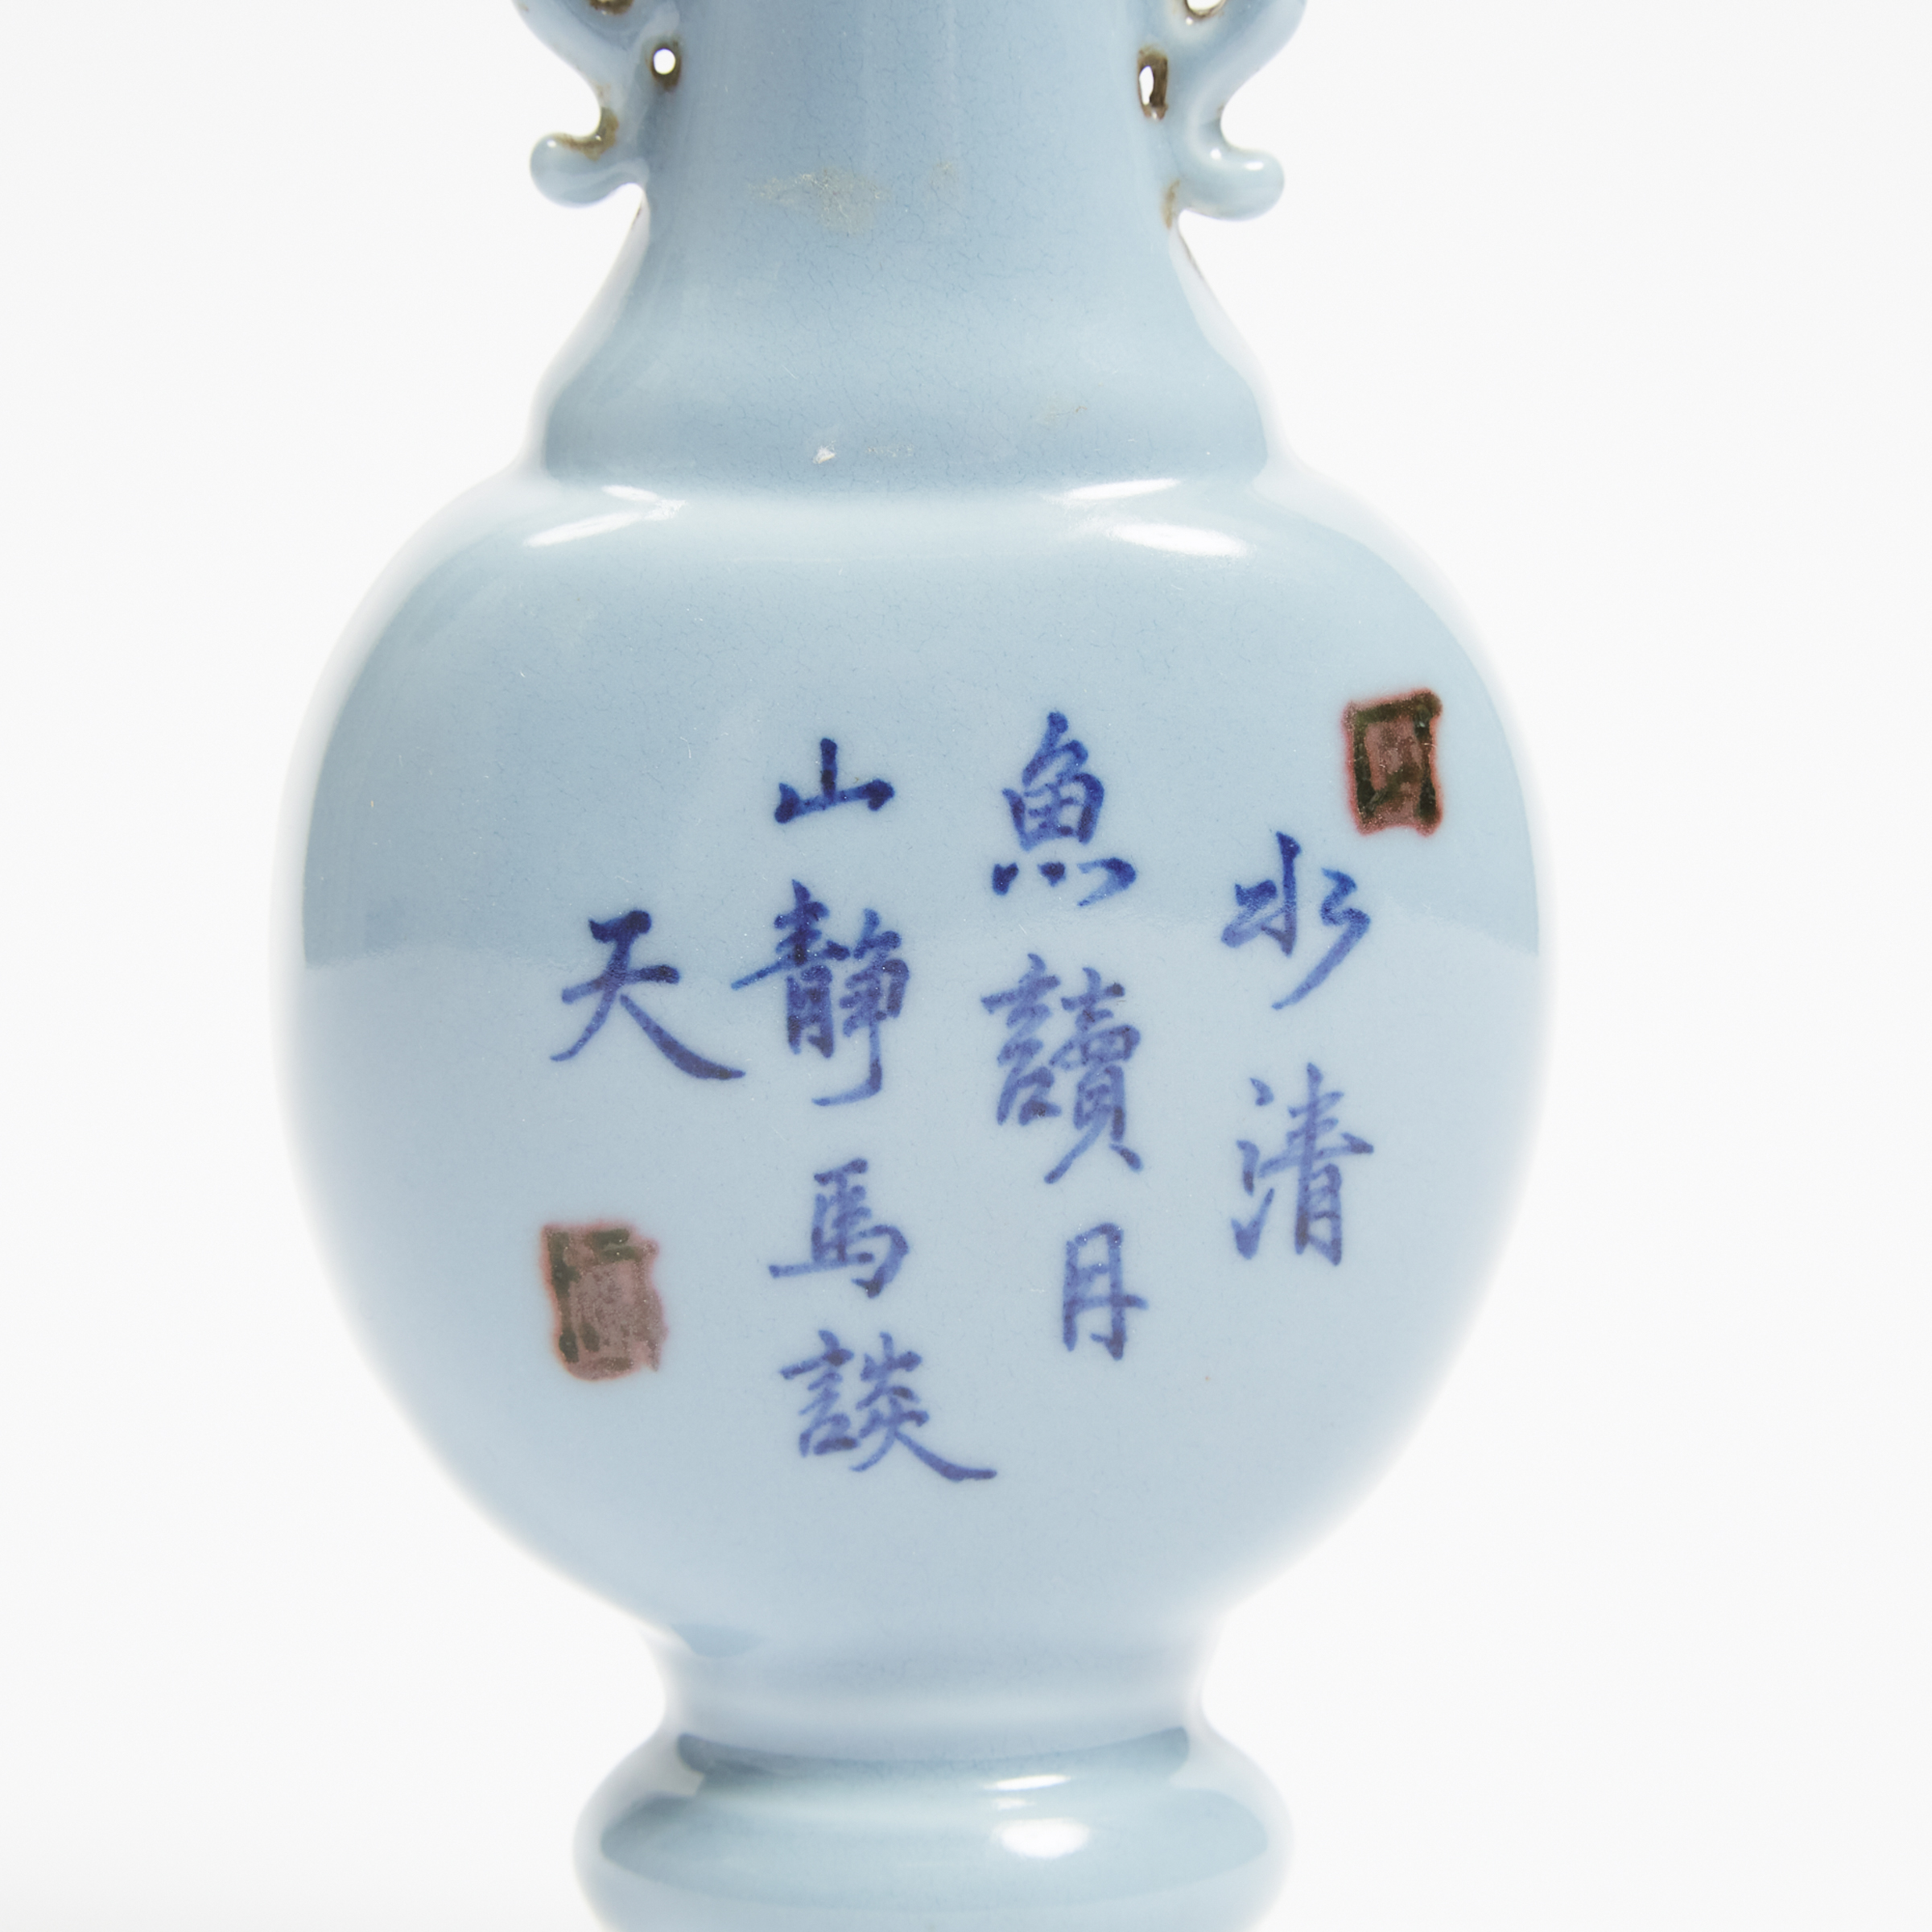 A Clair-de-Lune Glazed 'Calligraphy' Hanging Wall Vase, 19th Century